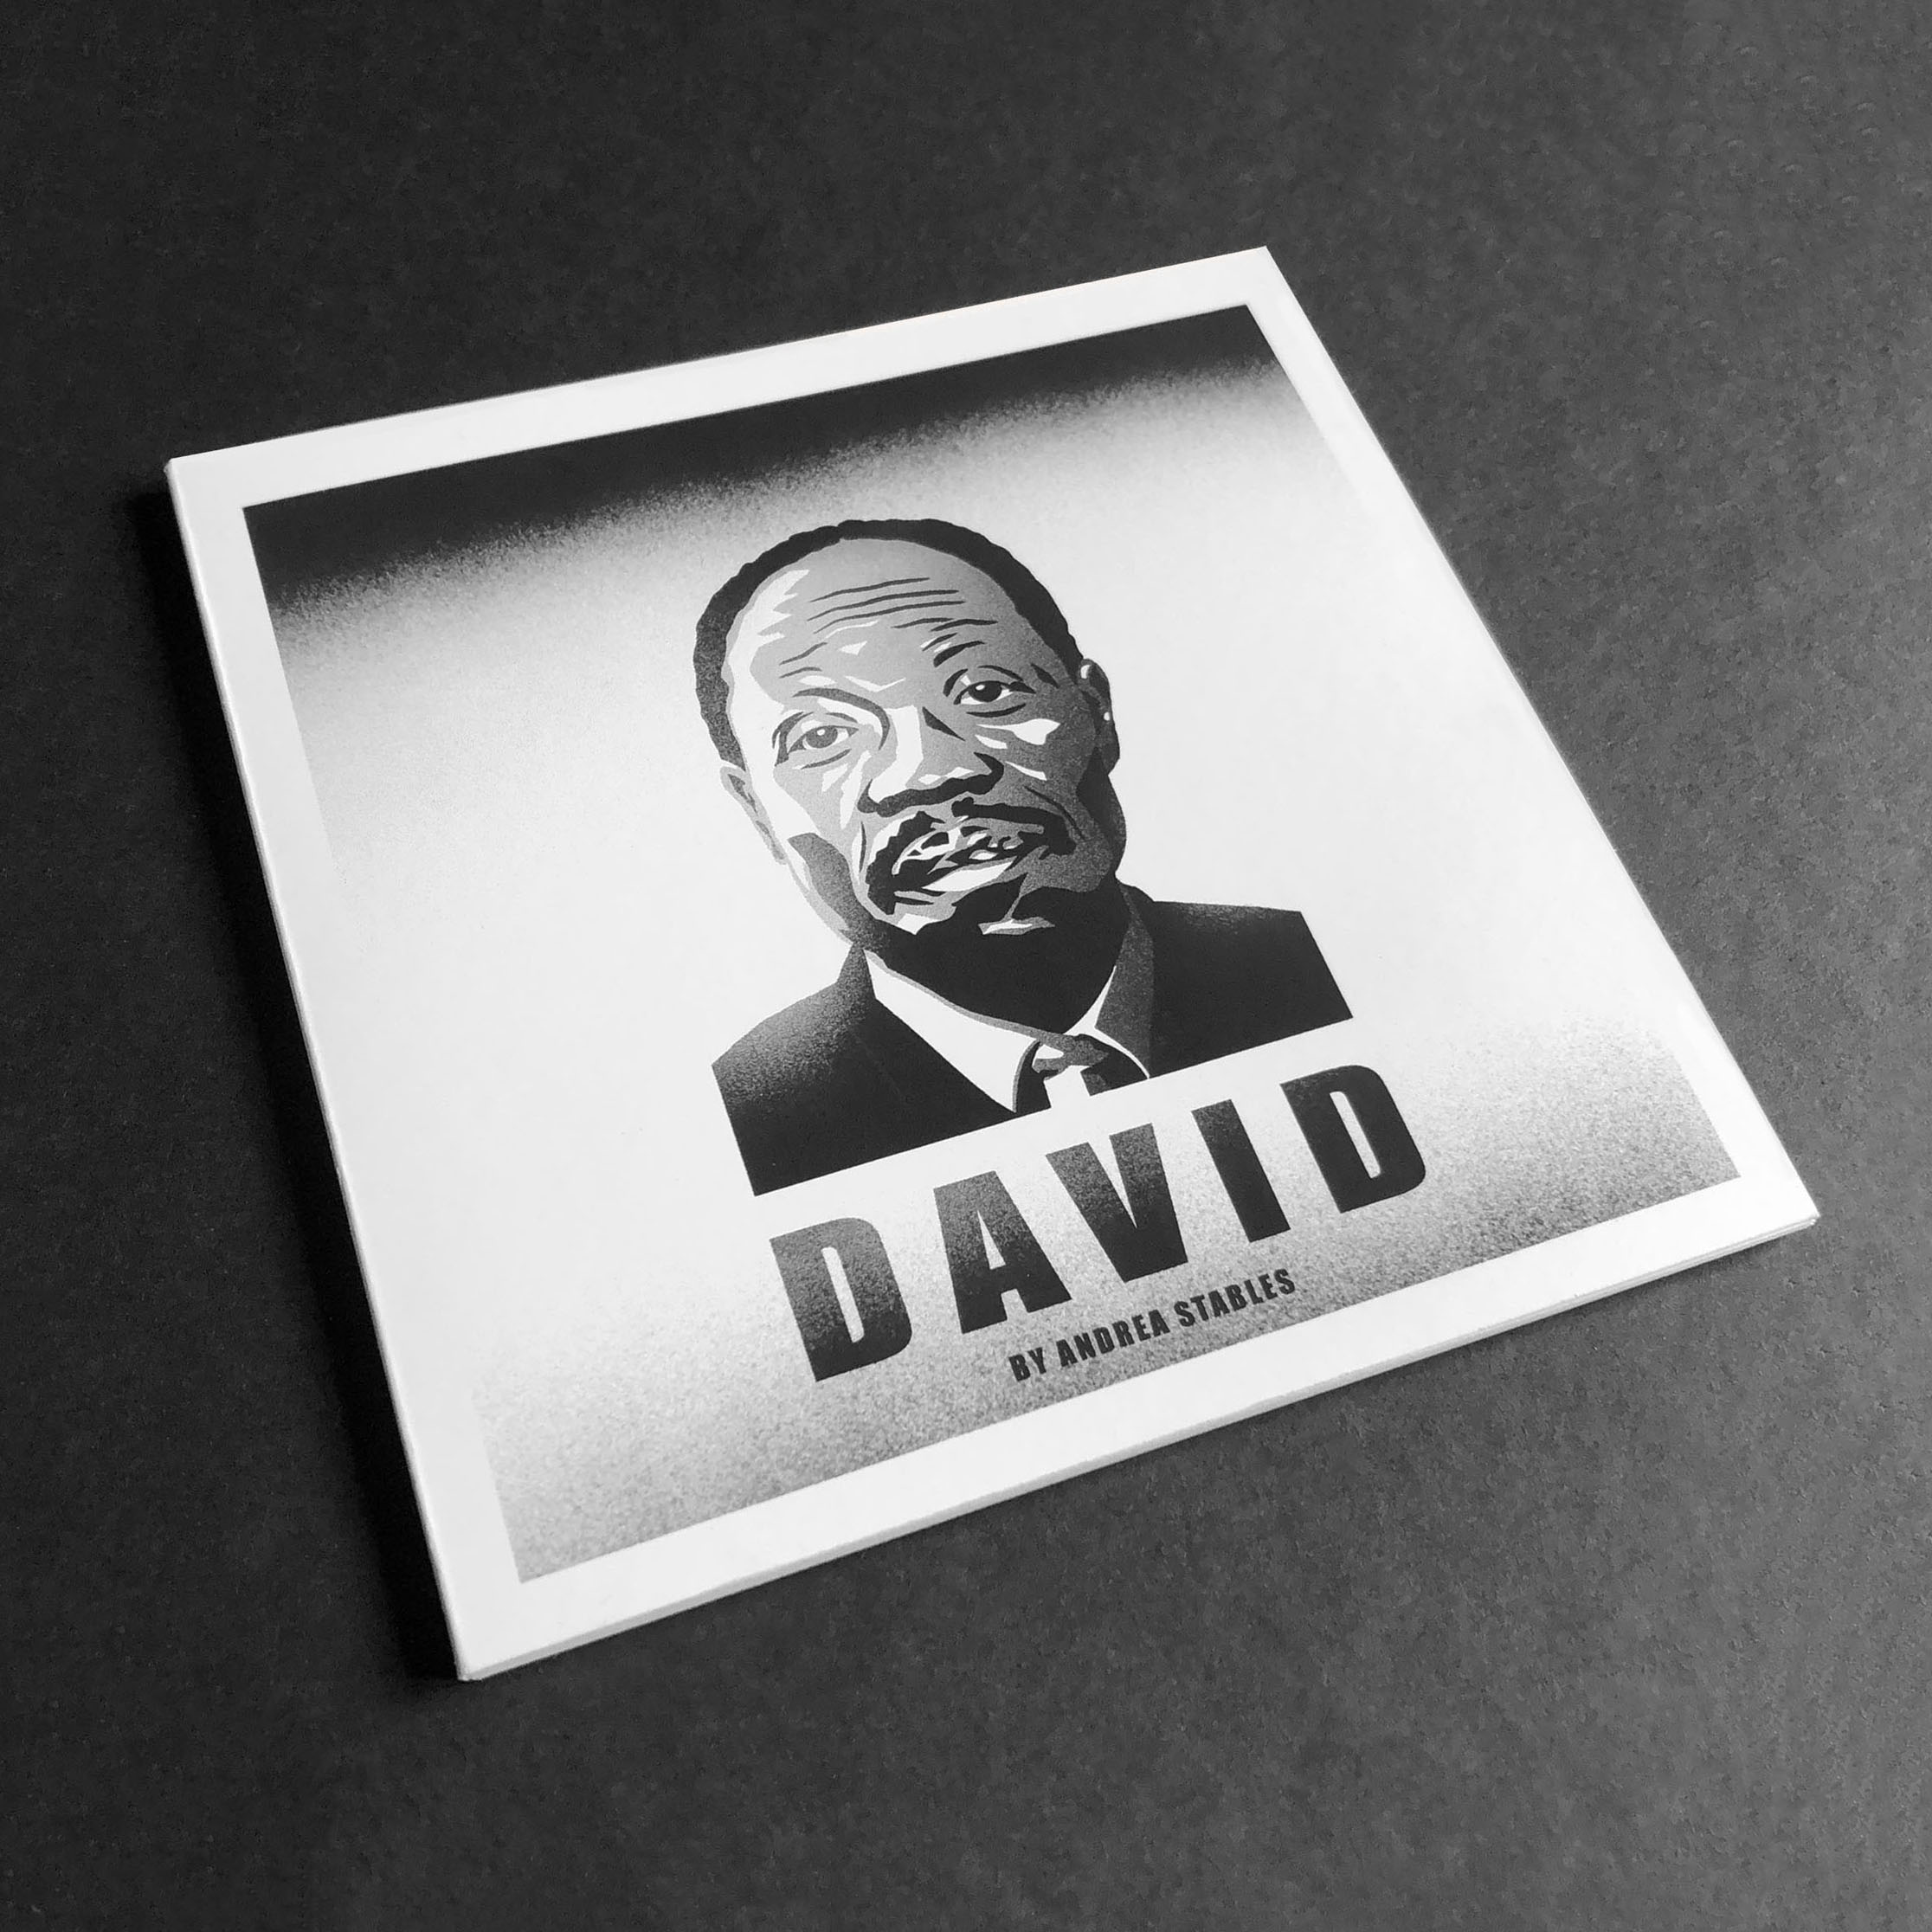 Front cover artwork featuring an illustrated portrait of David Oluwale